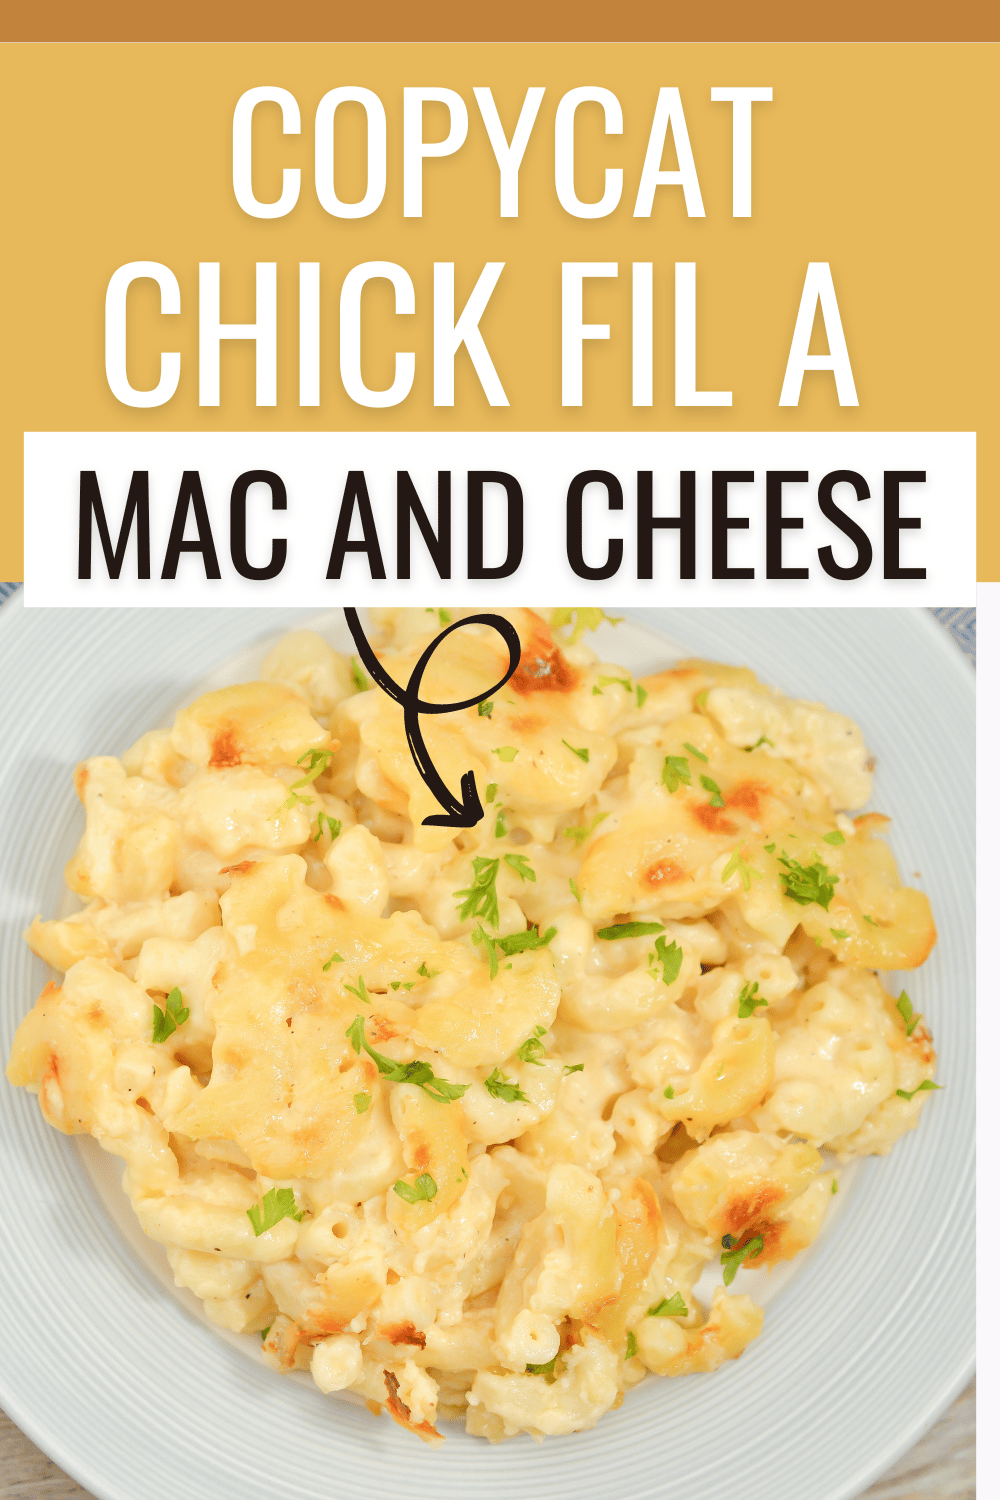 This Copycat Chick fil a Mac and Cheese is creamy, cheesy and oh so delicious! It's easy to make and perfect for busy weeknights. #copycatchickfilamacandcheese #copycatrecipe #copycatchickfila #macandcheese #chickfilamacandcheese via @wondermomwannab